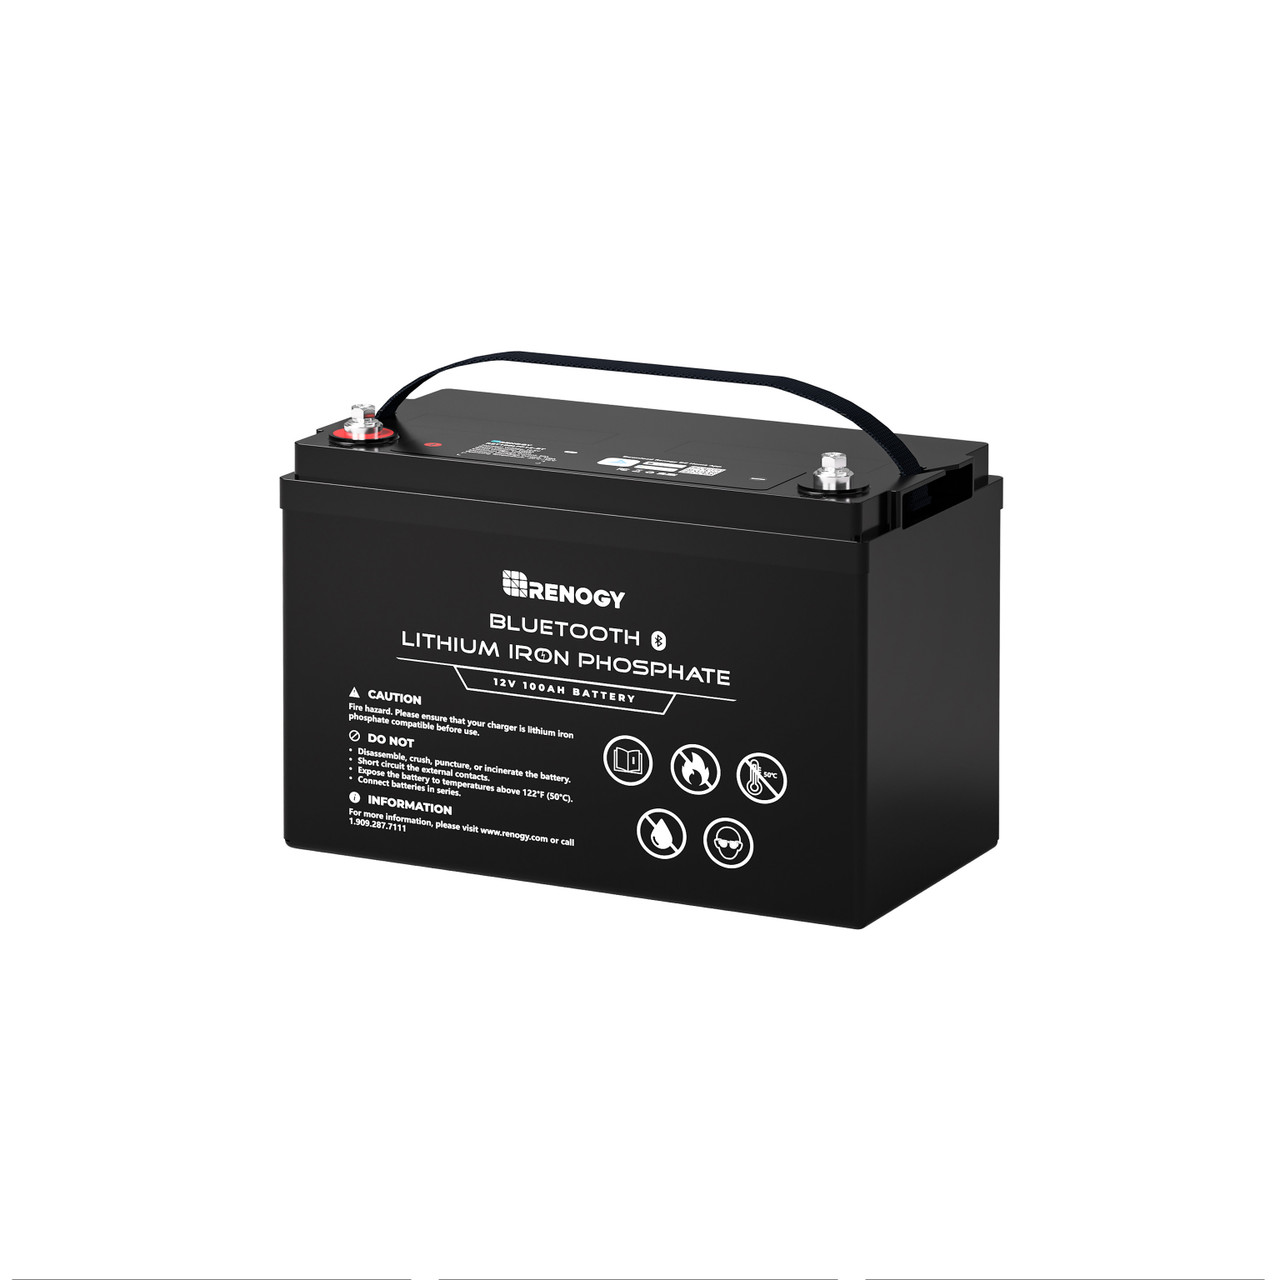 LiFePO4 Lithium Battery 12V 100Ah with Bluetooth & Low Temp off